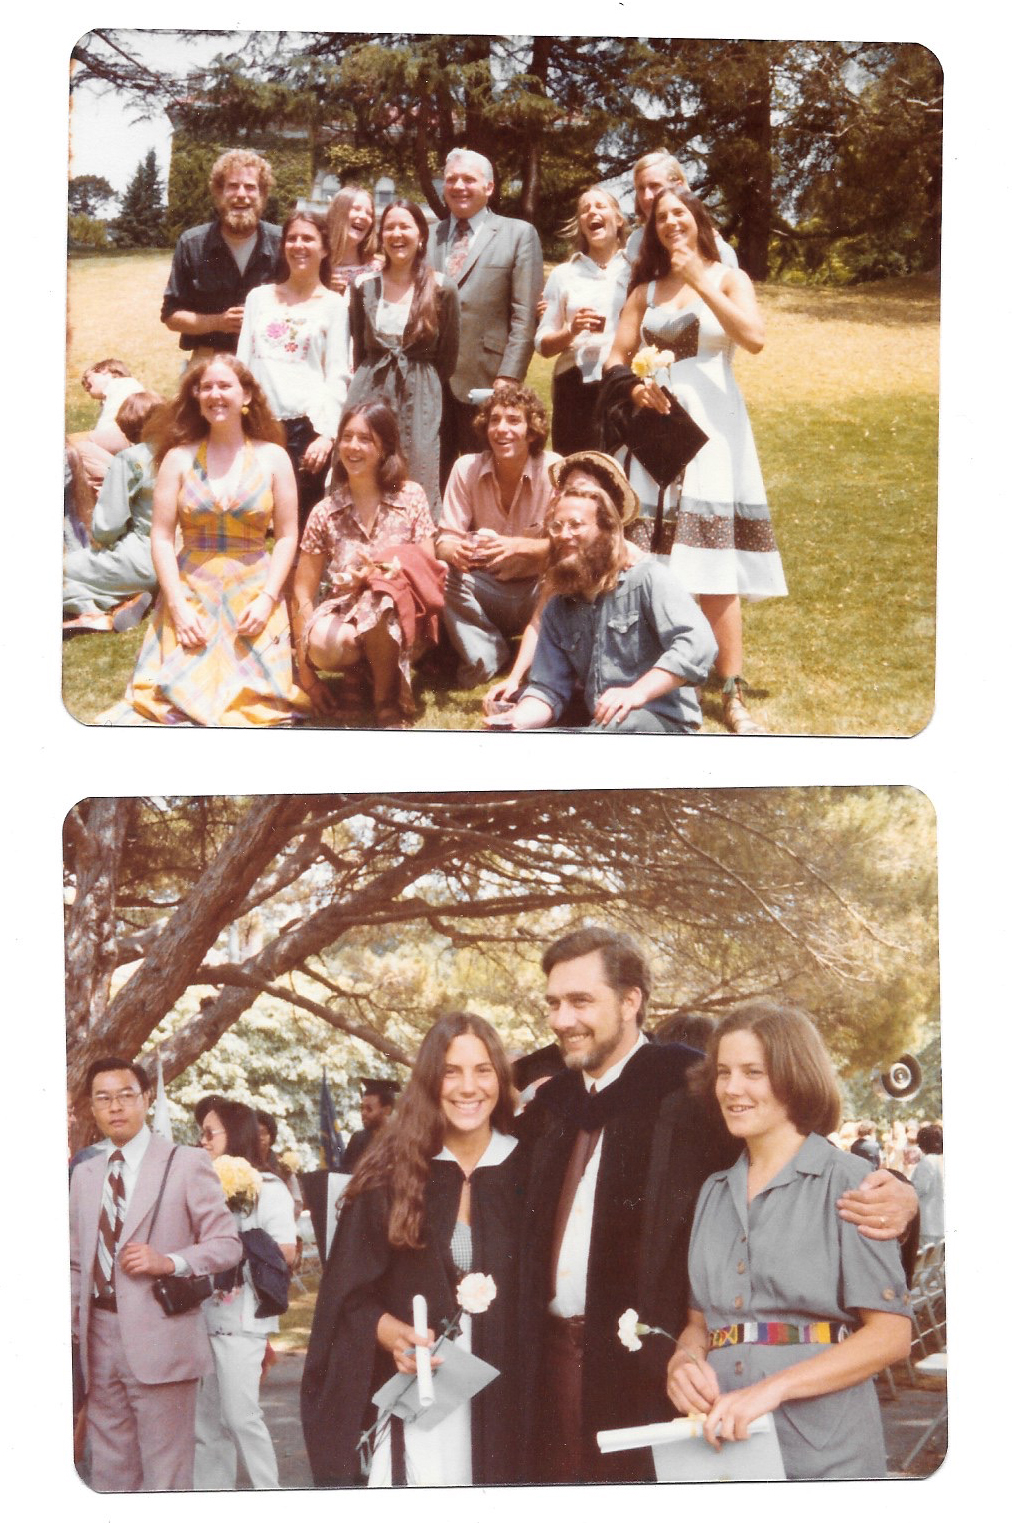 Two archival images of students at a graduation ceremony